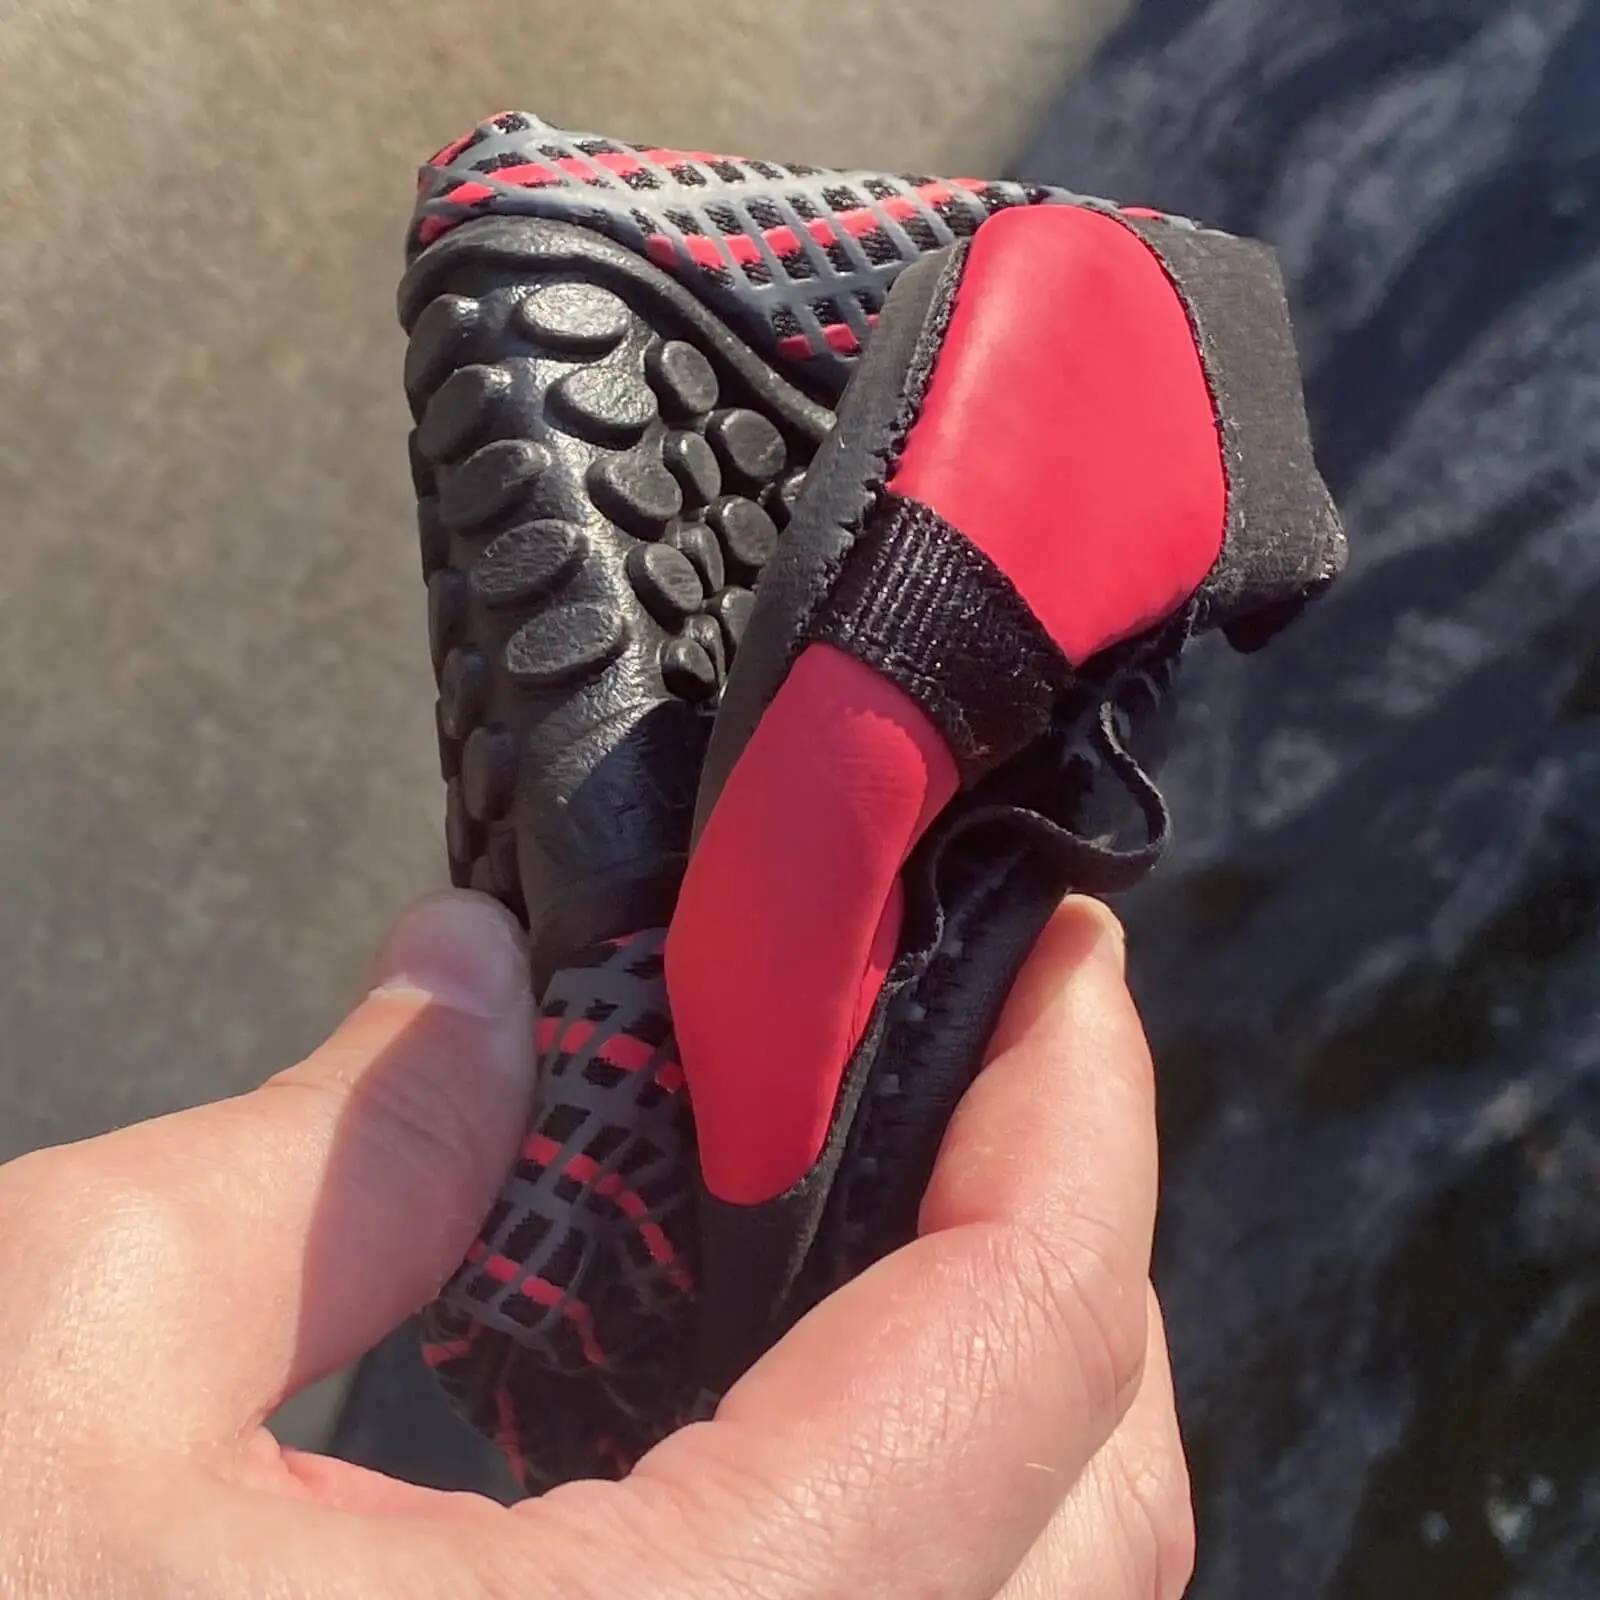 Folded up L-Run water shoe showing thinness and flexibility of the sole and upper